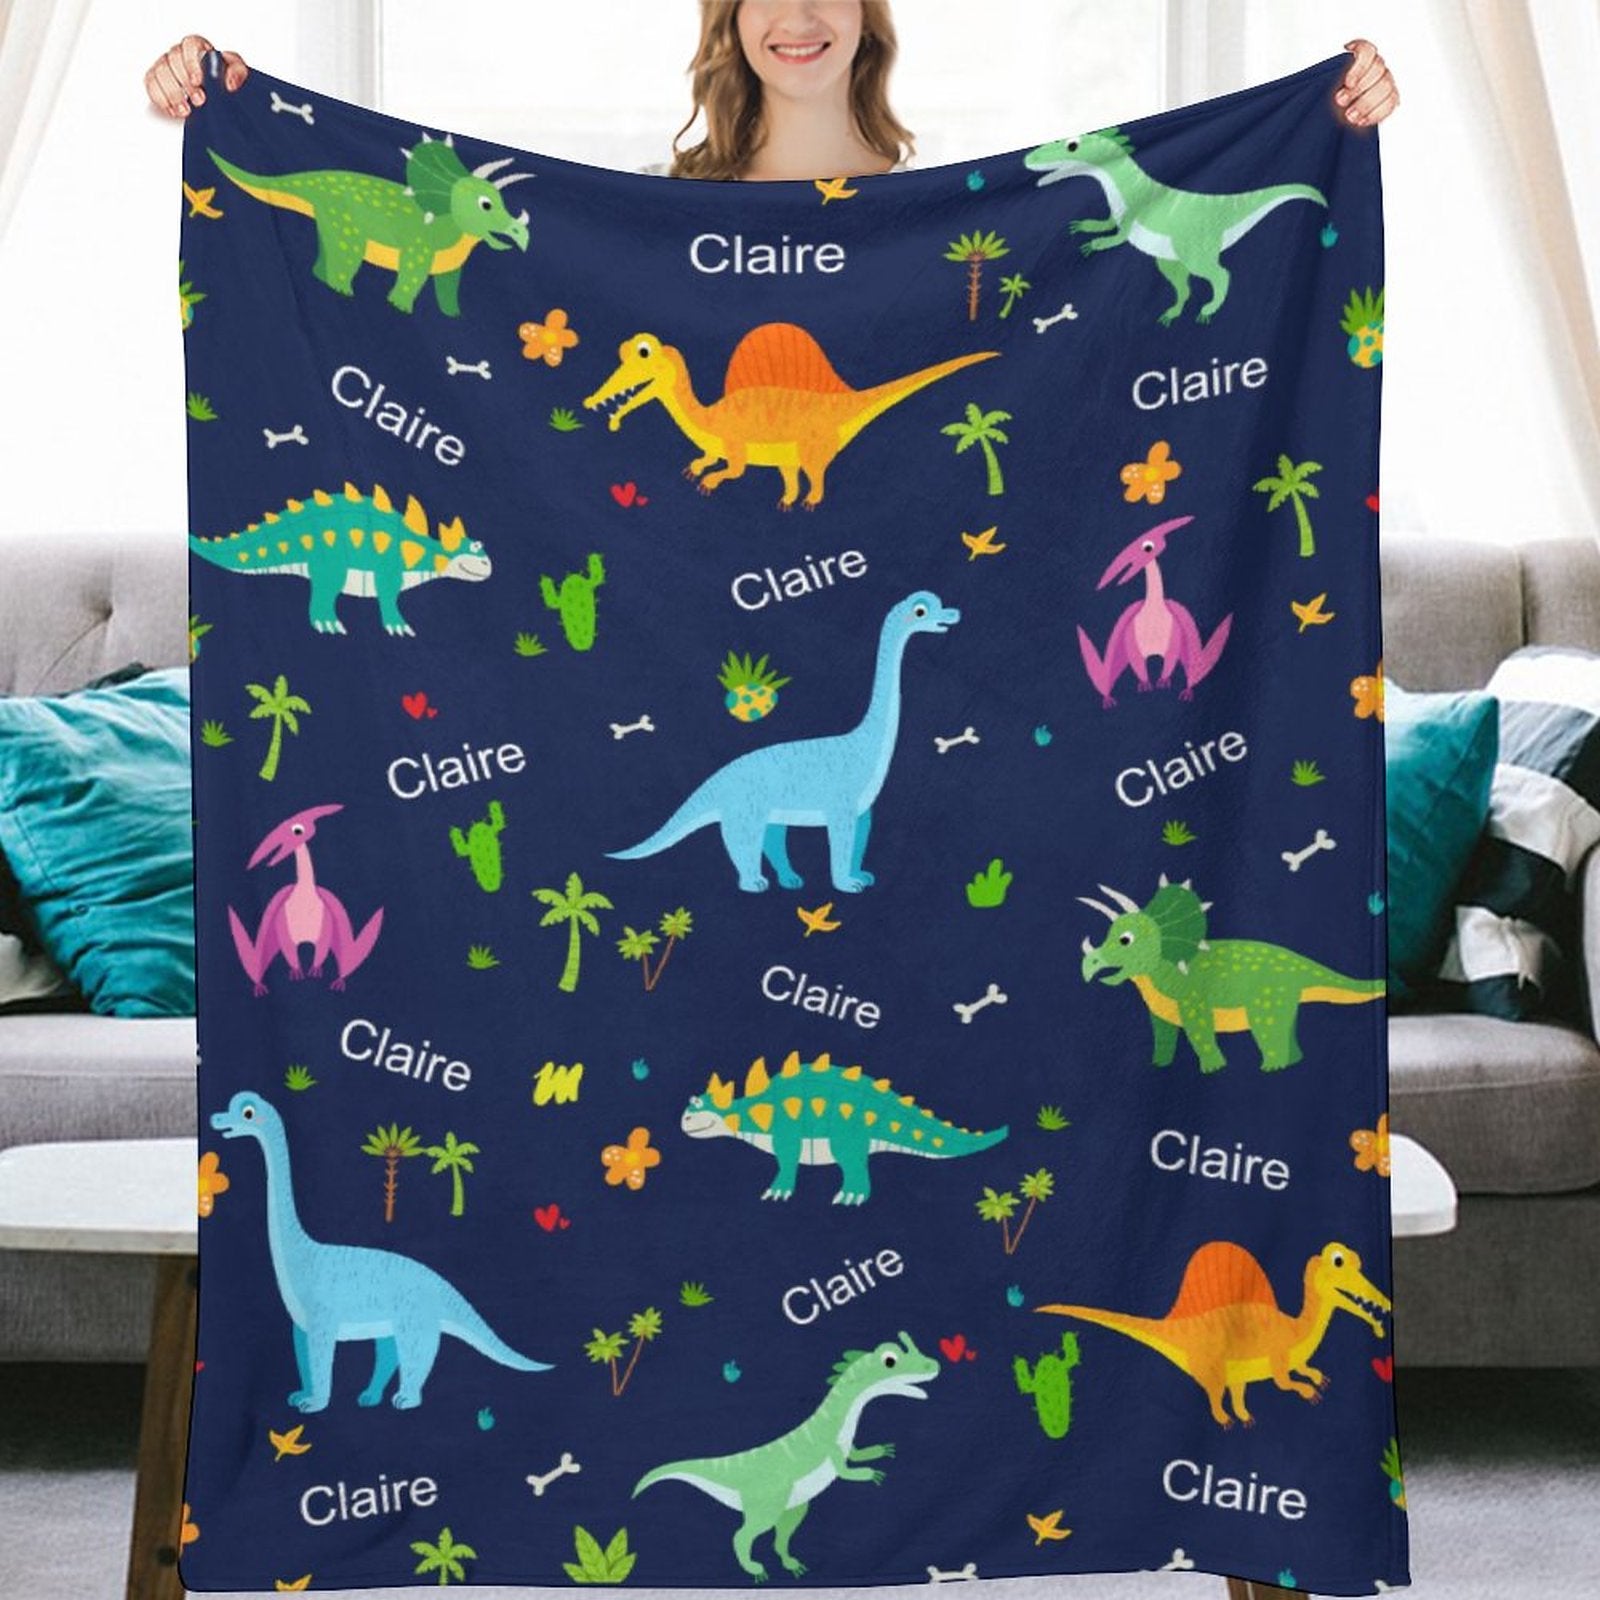 Personalized Name Baby Blankets with Dinosaur Design for Kids Toddlers - Customized Swadding Throw Blanket Gifts for Birthday Christmas